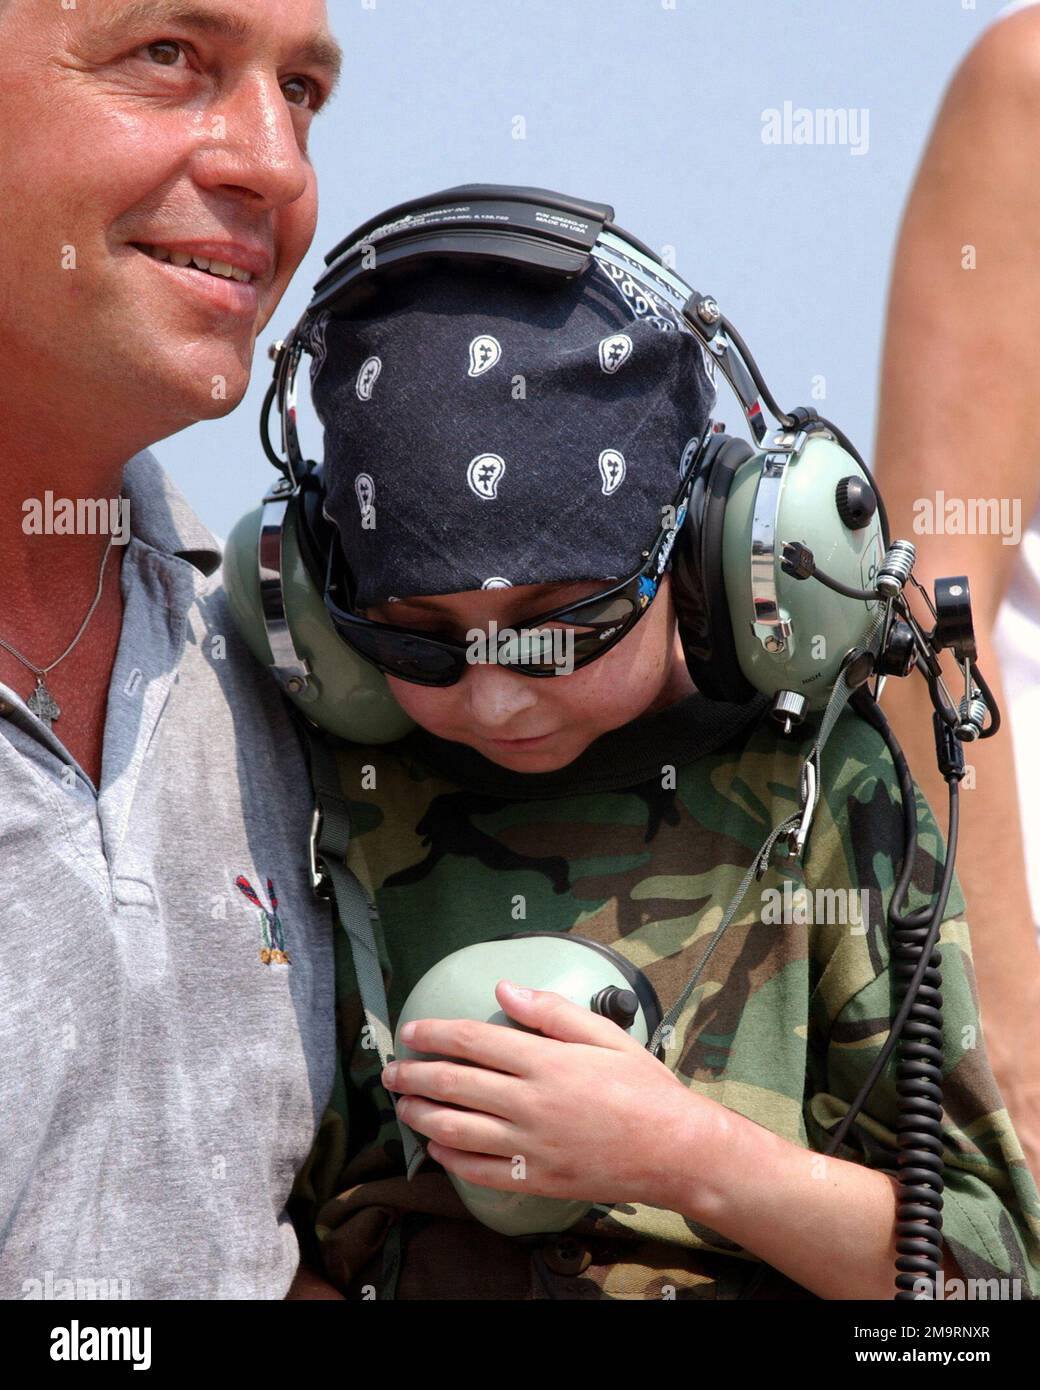 030814-F-2621S-008. [Complete] Scene Caption: Garrett Matuszewski (center) a 10-year-old guest of the Make-A-Wish Foundation talks to pilots on his very own headset, while seated with his father Mr. Mark Matuszewski, during his visit to the 108th Fighter Wing (FW), Ohio National Guard (OHANG), at Swanton, Ohio. Garrett's wish was to visit a military installation with F-16 fighter aircraft. Members of the 180th FW made sure to make it a memorable trip for Garrett. He spent the day on the flight line watching the jets take off while listening and talking to the pilots on his very own headset, le Stock Photo